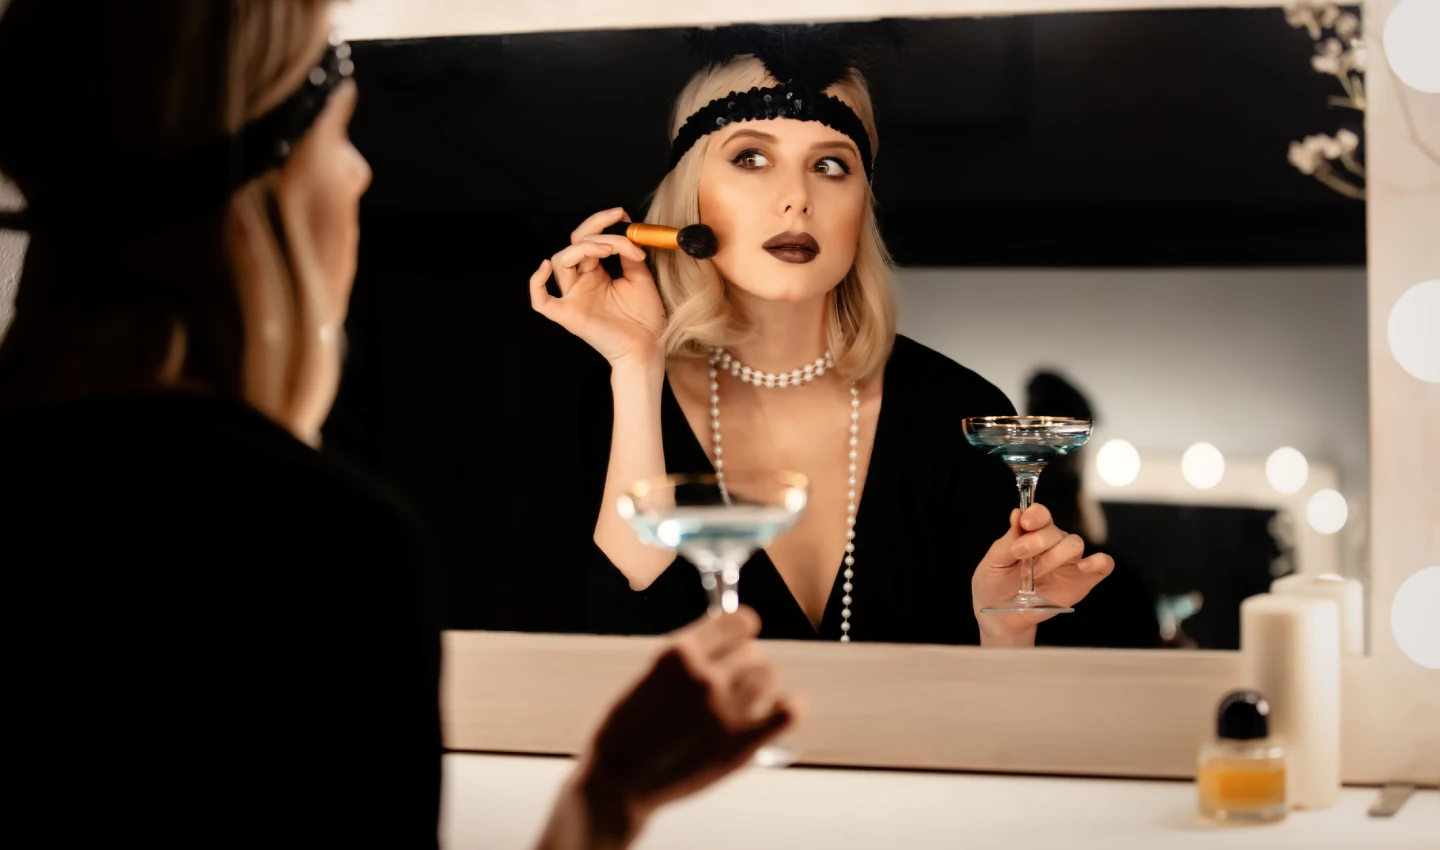 Woman in black dress applying cream blush using essential techniques in front of a mirror.